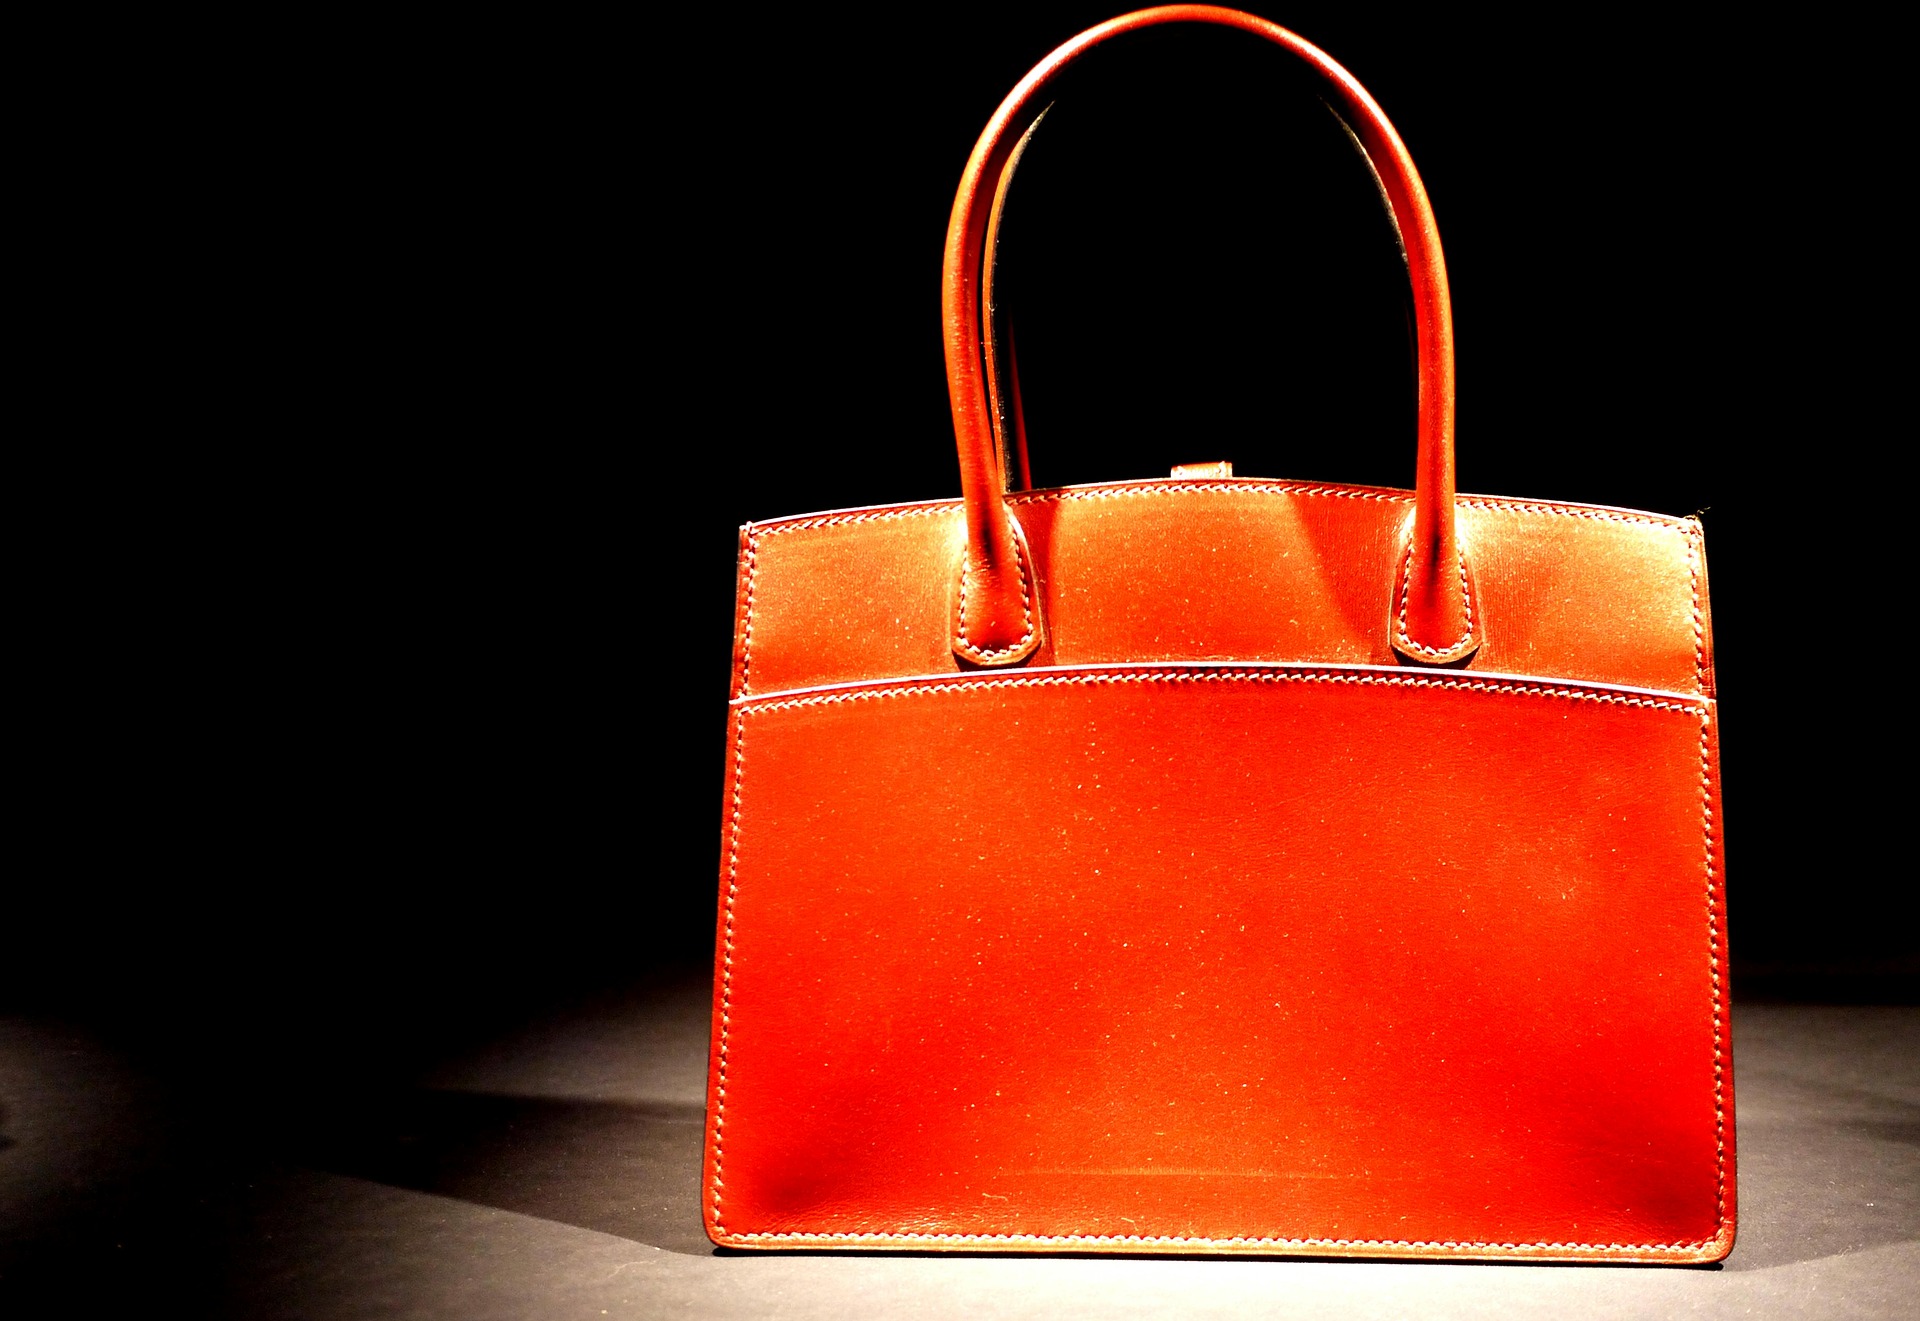 The World's Best & Most Sought-After Luxury Brands